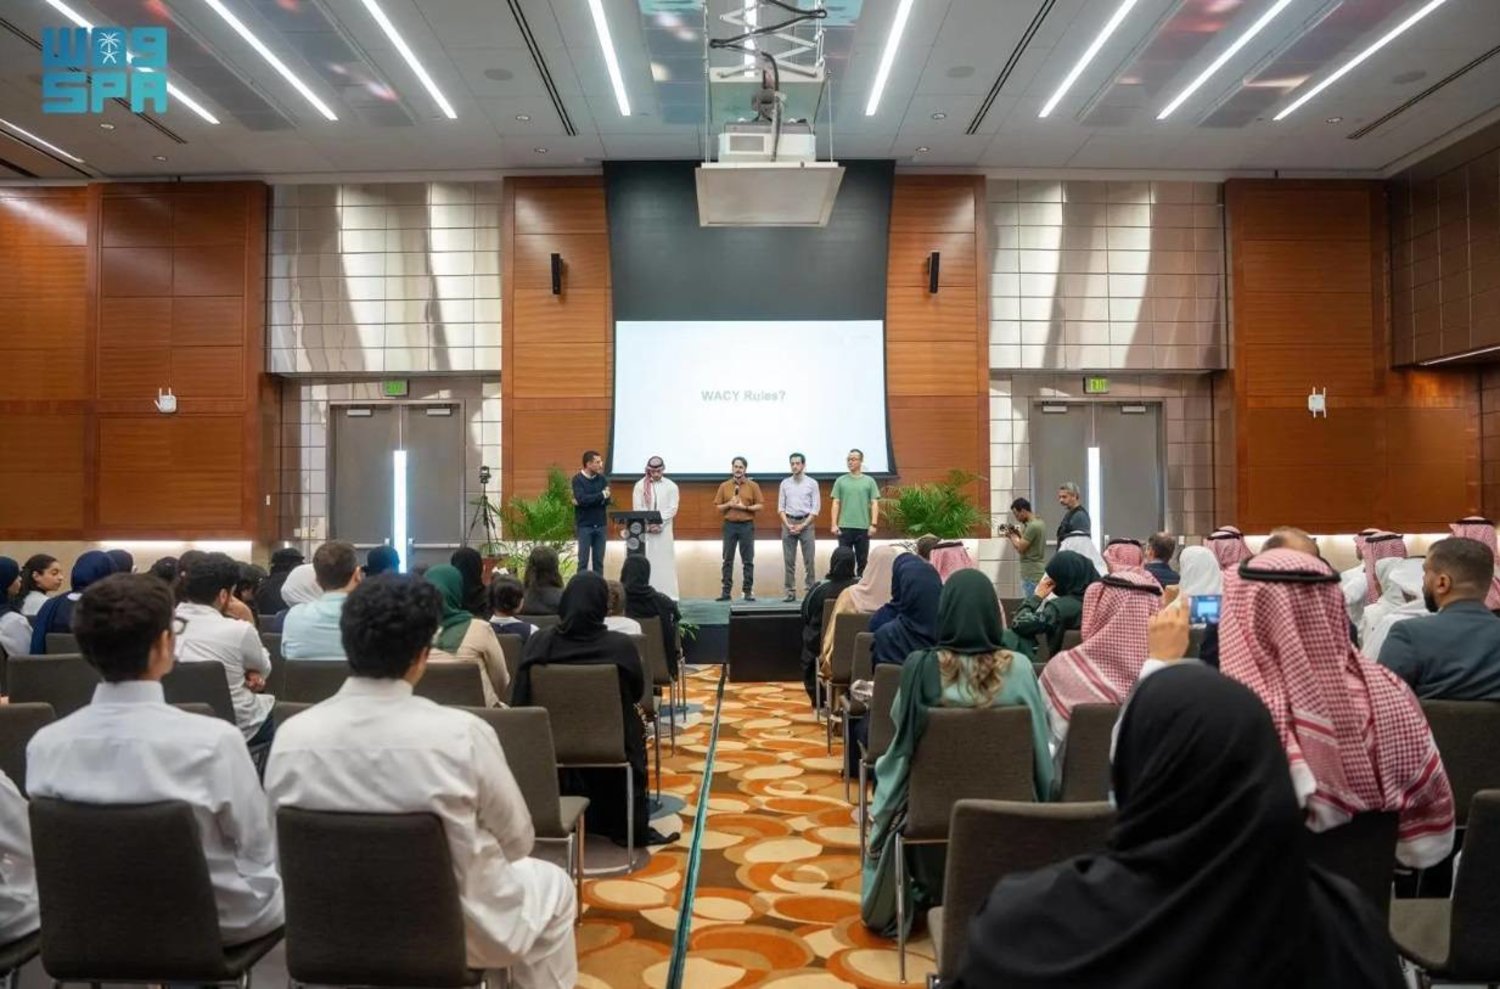 Organized by the Saudi Data and AI Authority (SDAIA) in collaboration with KAUST, this global competition took place simultaneously in 39 countries, drawing over 18,000 students from public schools. SPA